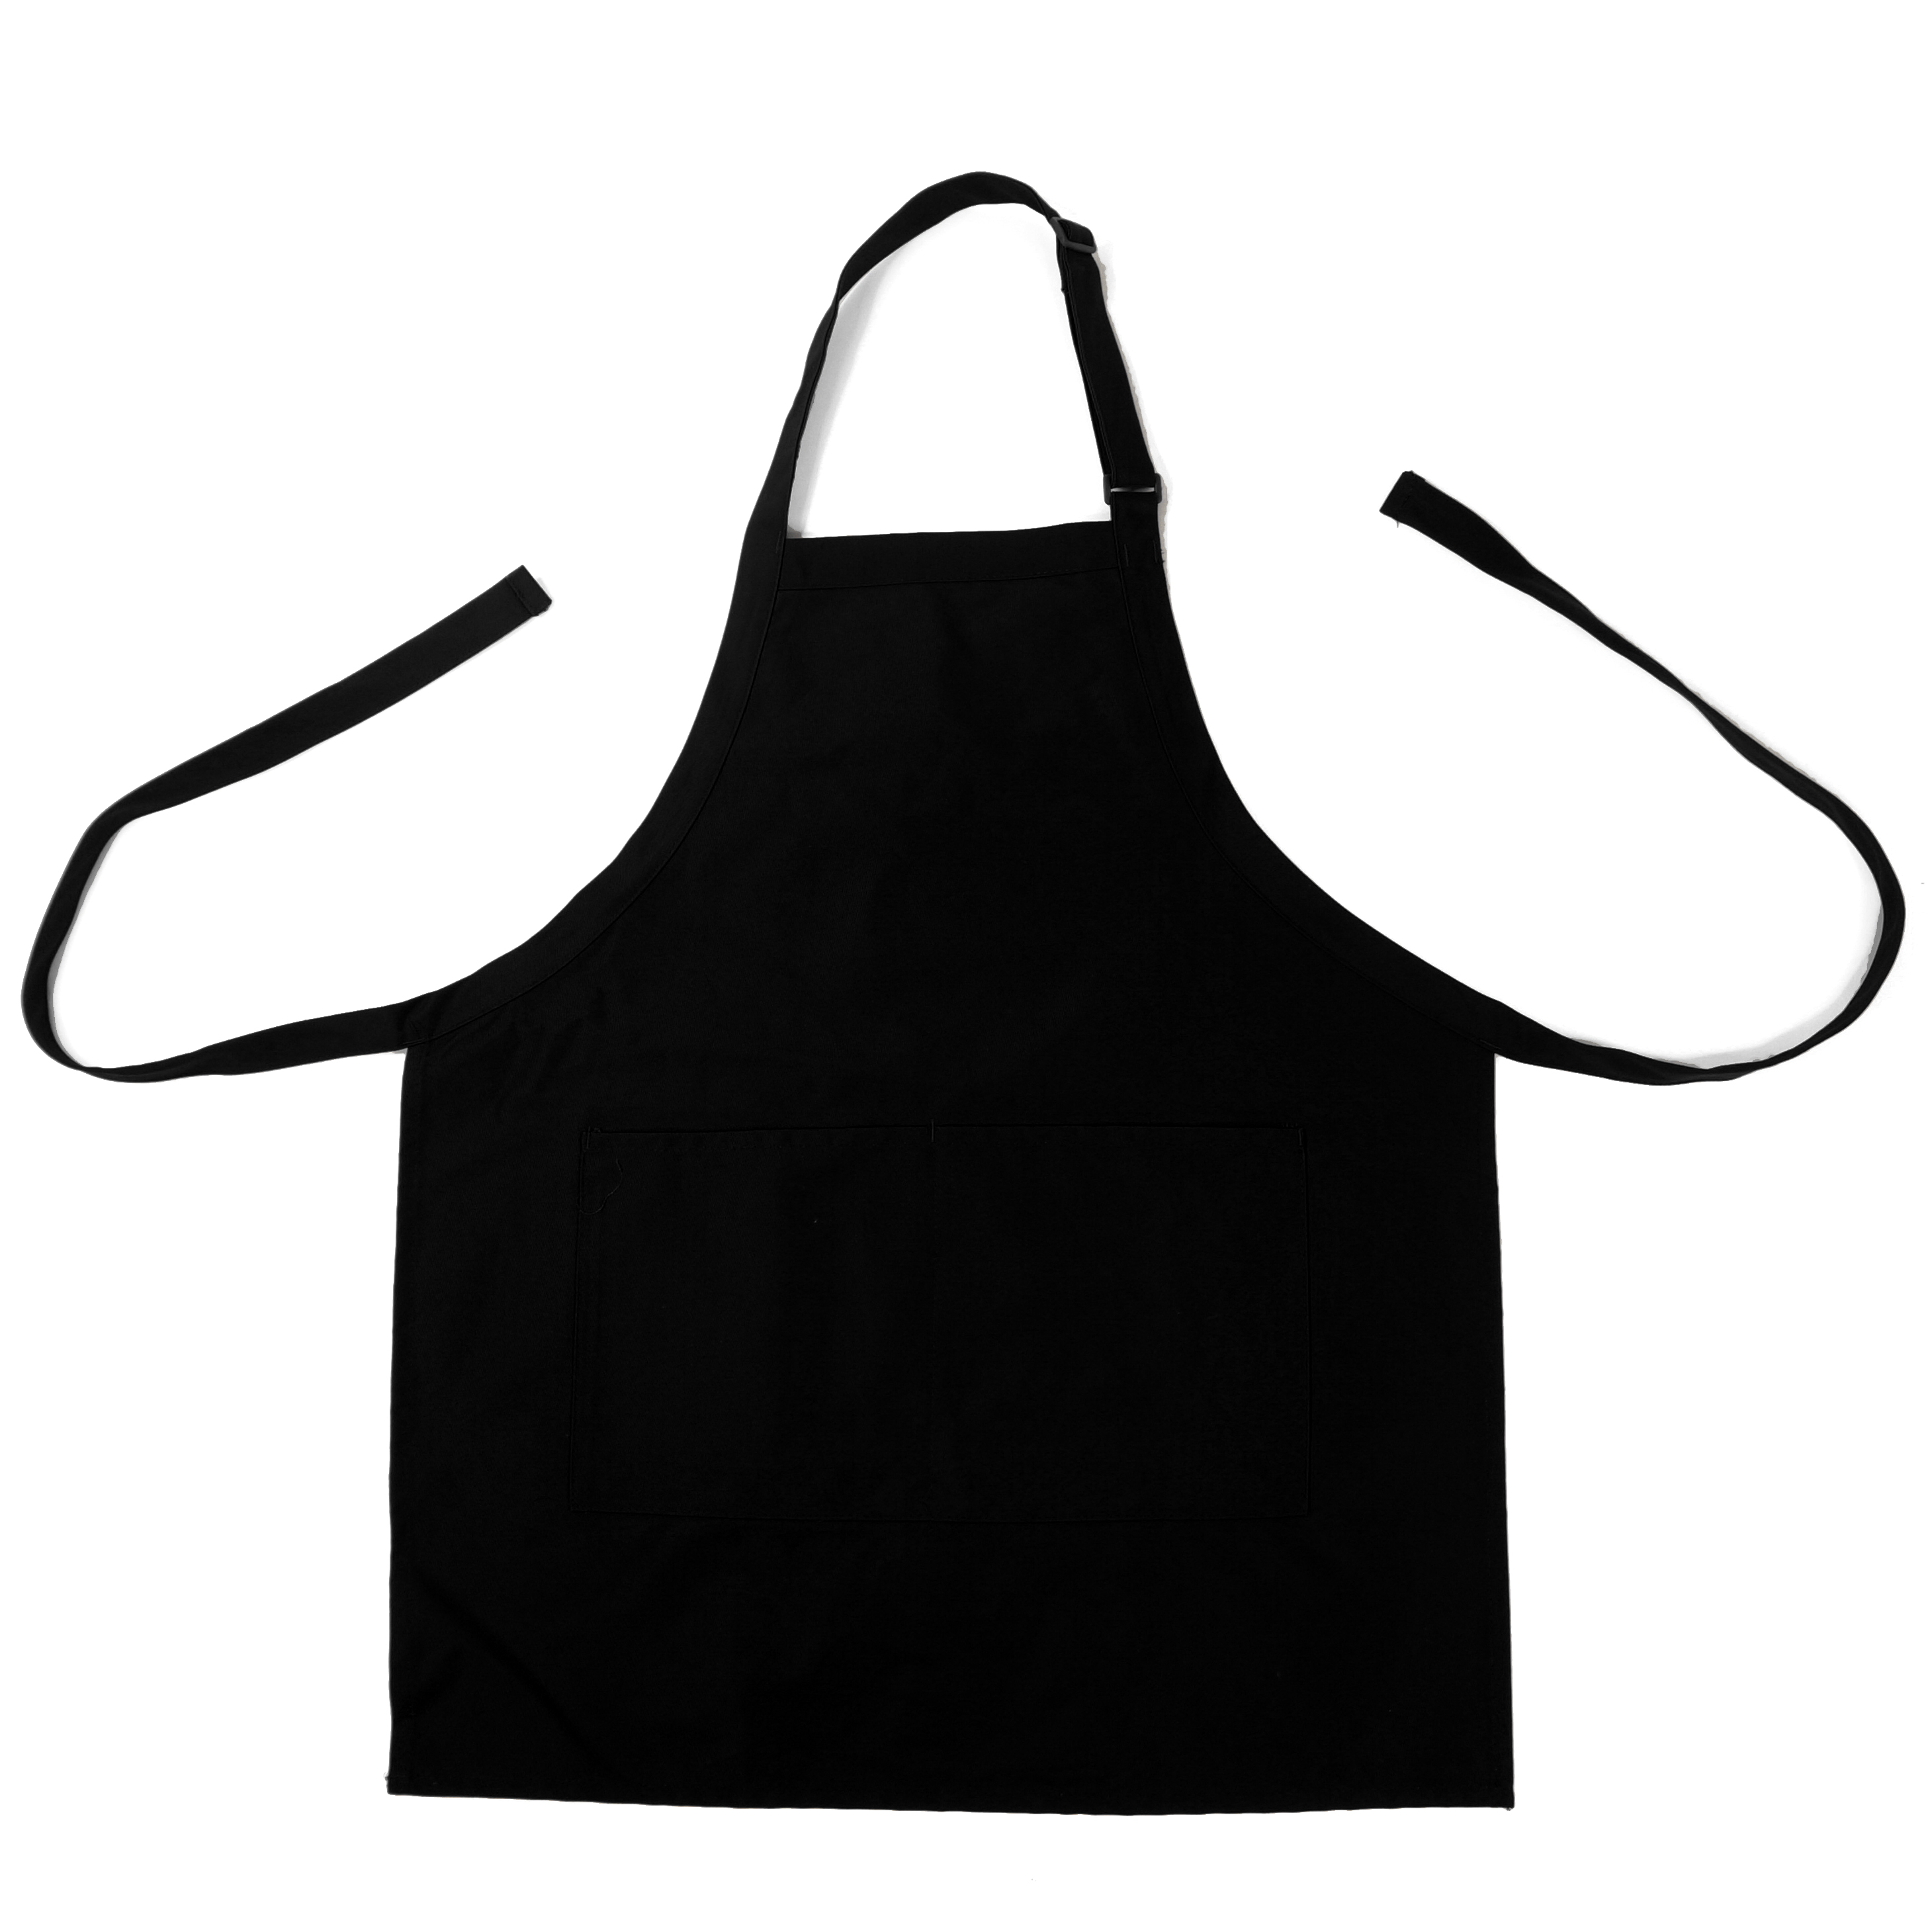 60 Pack Adjustable Full Size Bib Apron with 2 Pockets Cooking  Aprons for Chef, Servers, Bar Tenders,  Barbers, Gardener, Craftsmen, Decorators, Work Apron Uniform %100 Cotton one size - image 1 of 3